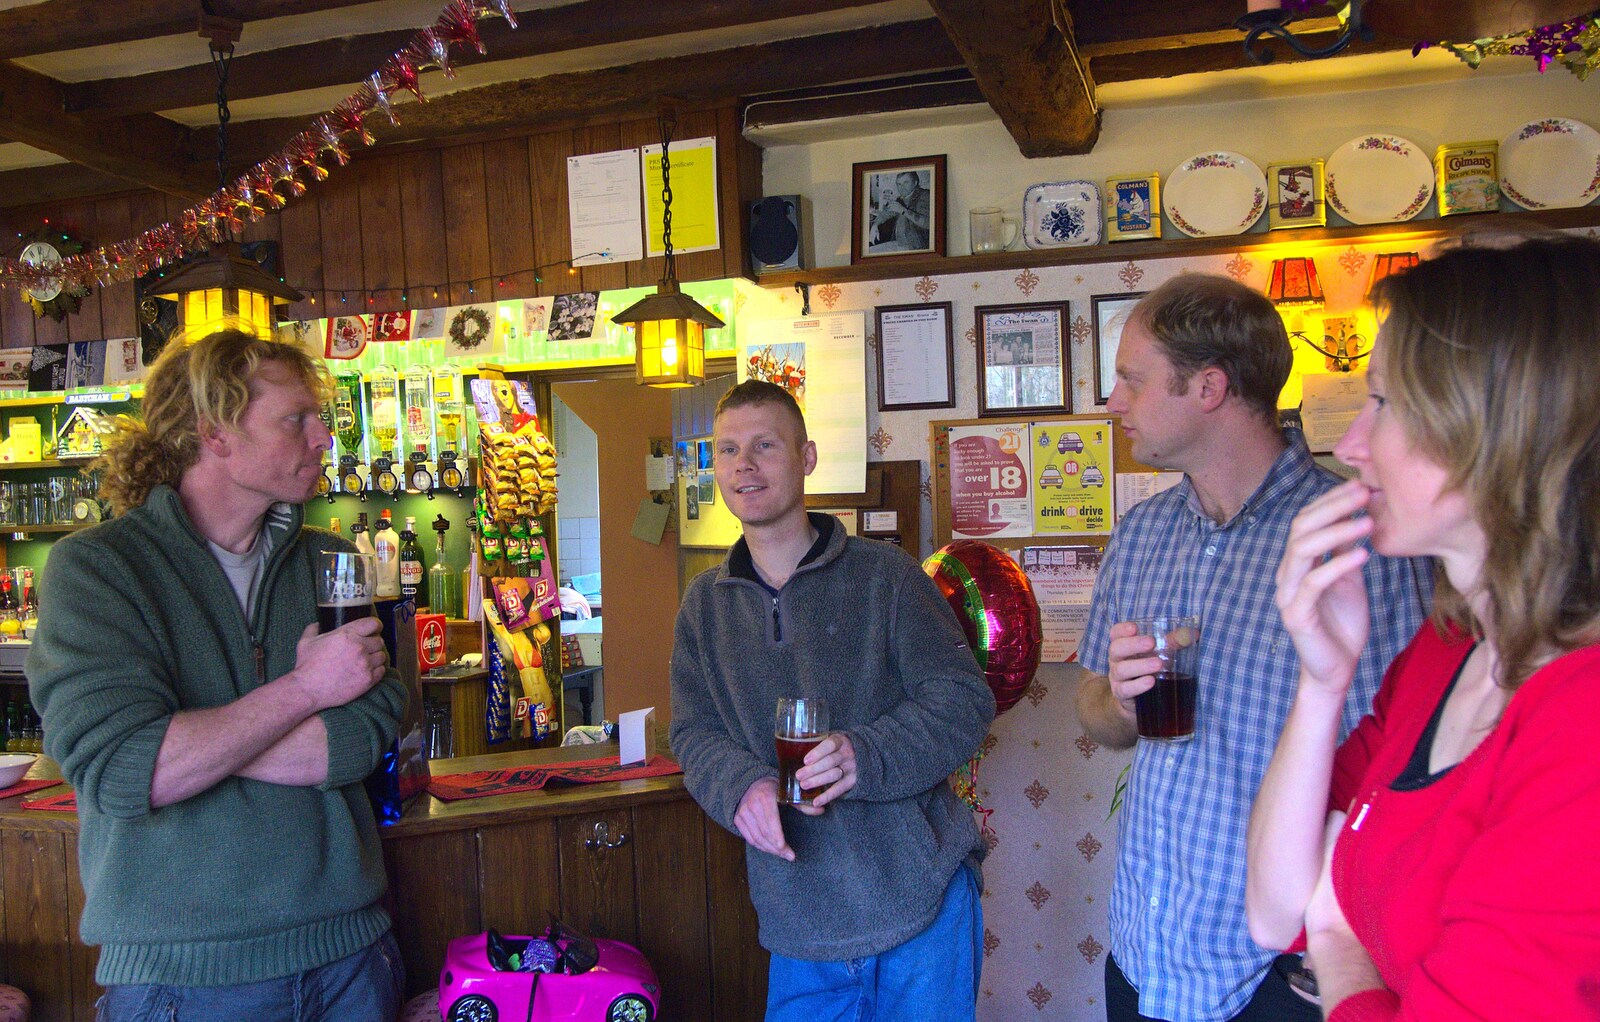 Wavy and Mikey P at the bar from Christmas Day in the Swan Inn, Brome, Suffolk - 25th December 2011